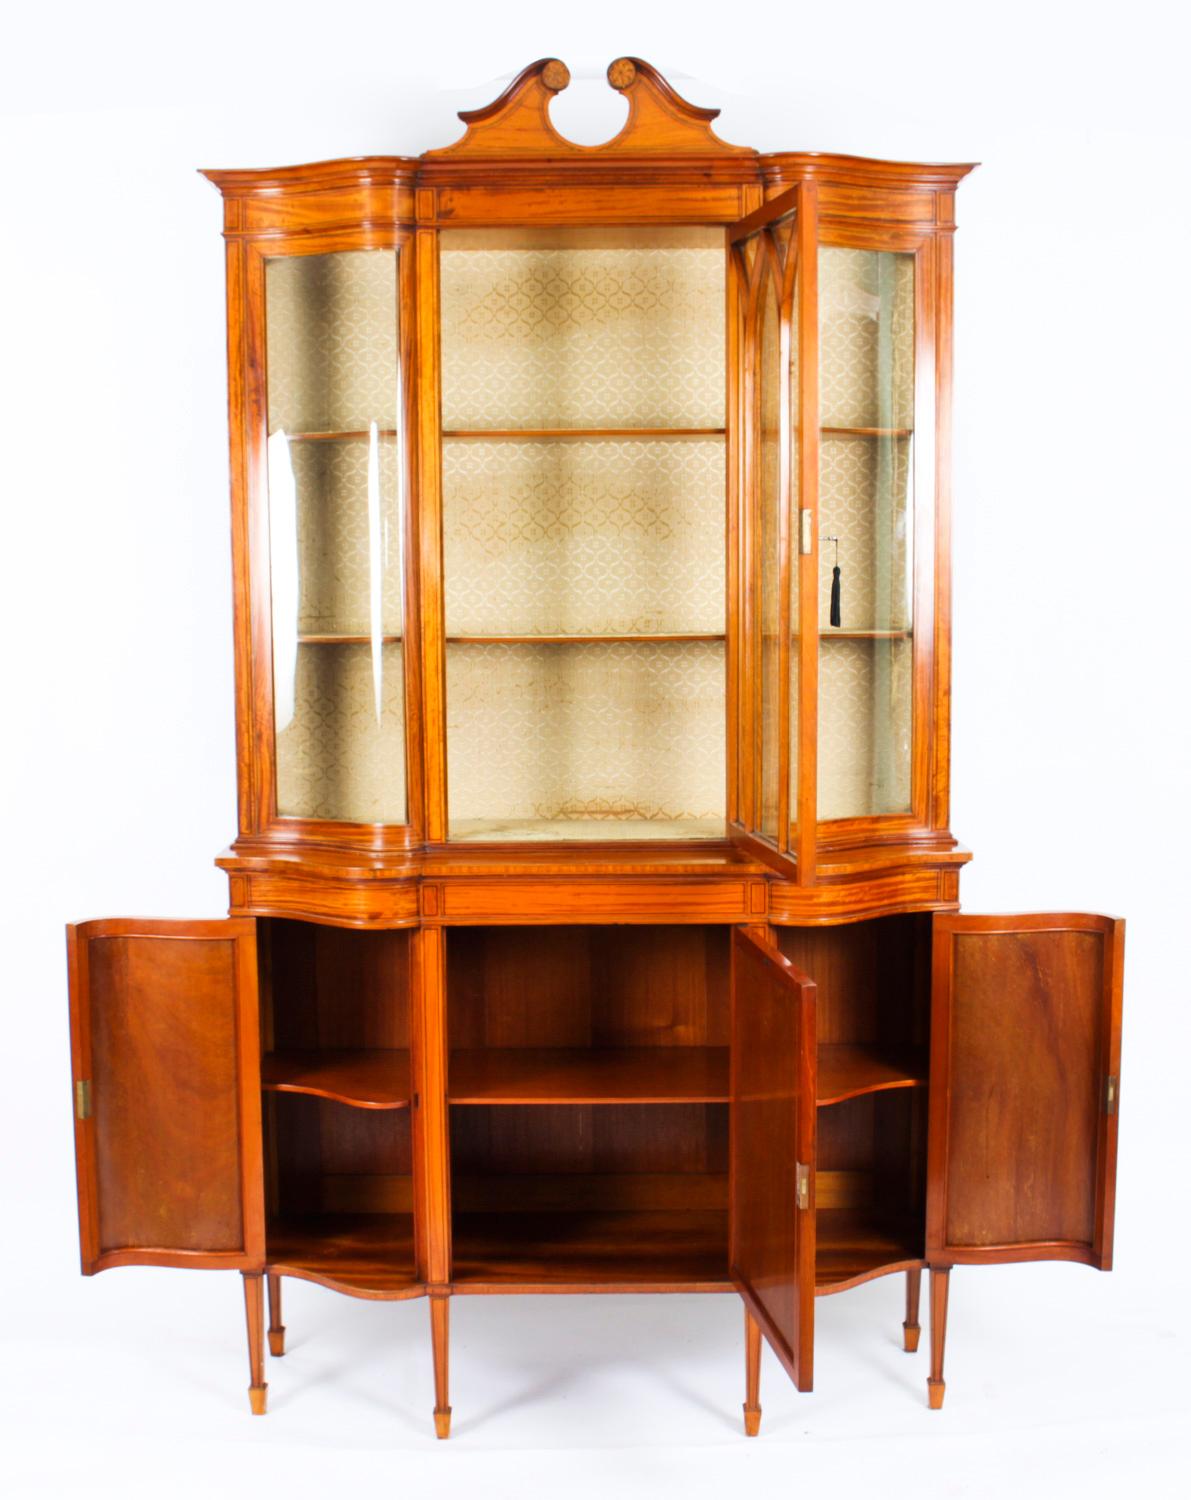 Antique Edwardian Serpentine Satinwood Inlaid Display Cabinet 19th C For Sale 12